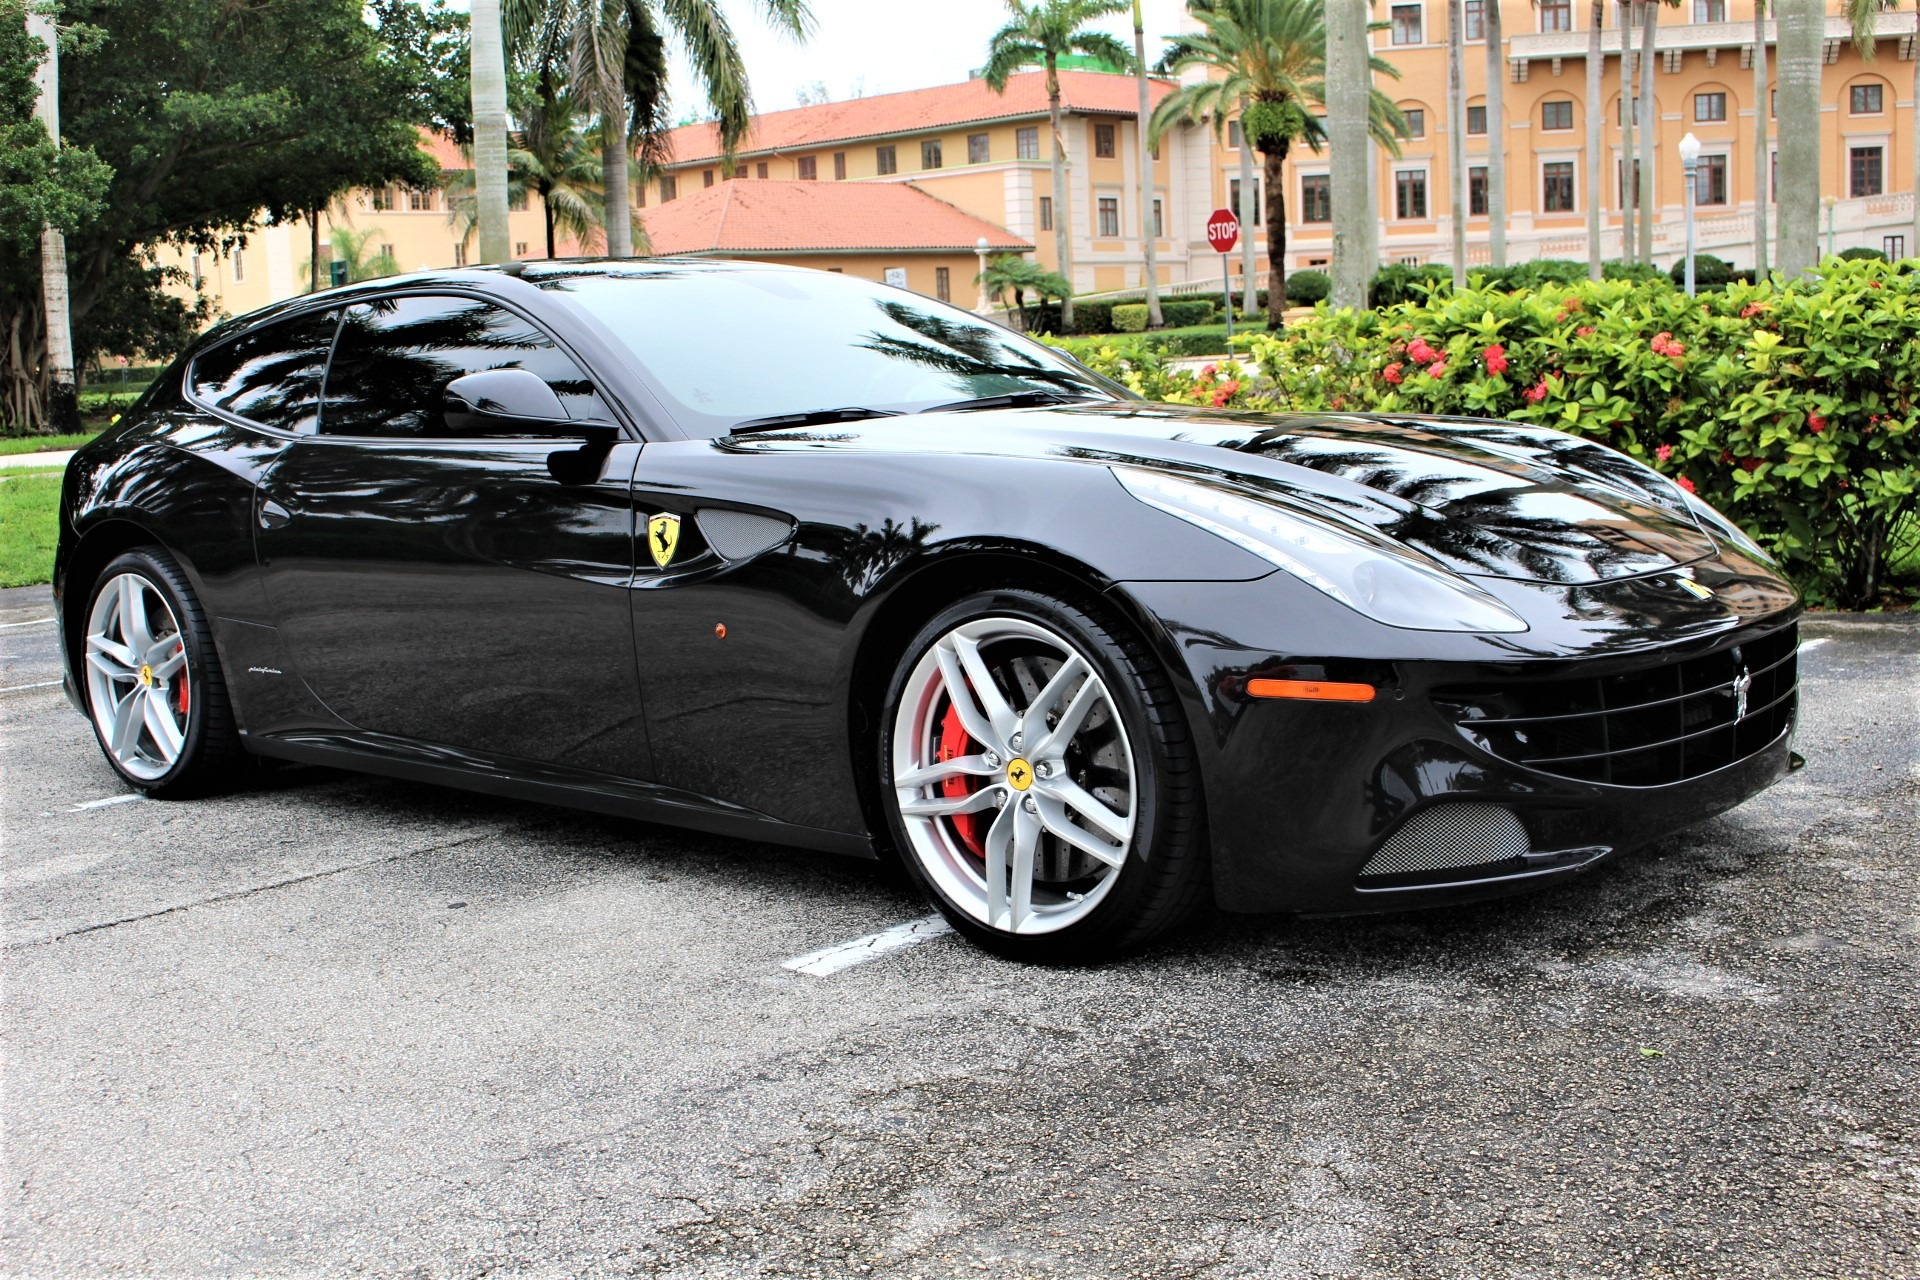 Used 2013 Ferrari FF for sale Sold at The Gables Sports Cars in Miami FL 33146 3